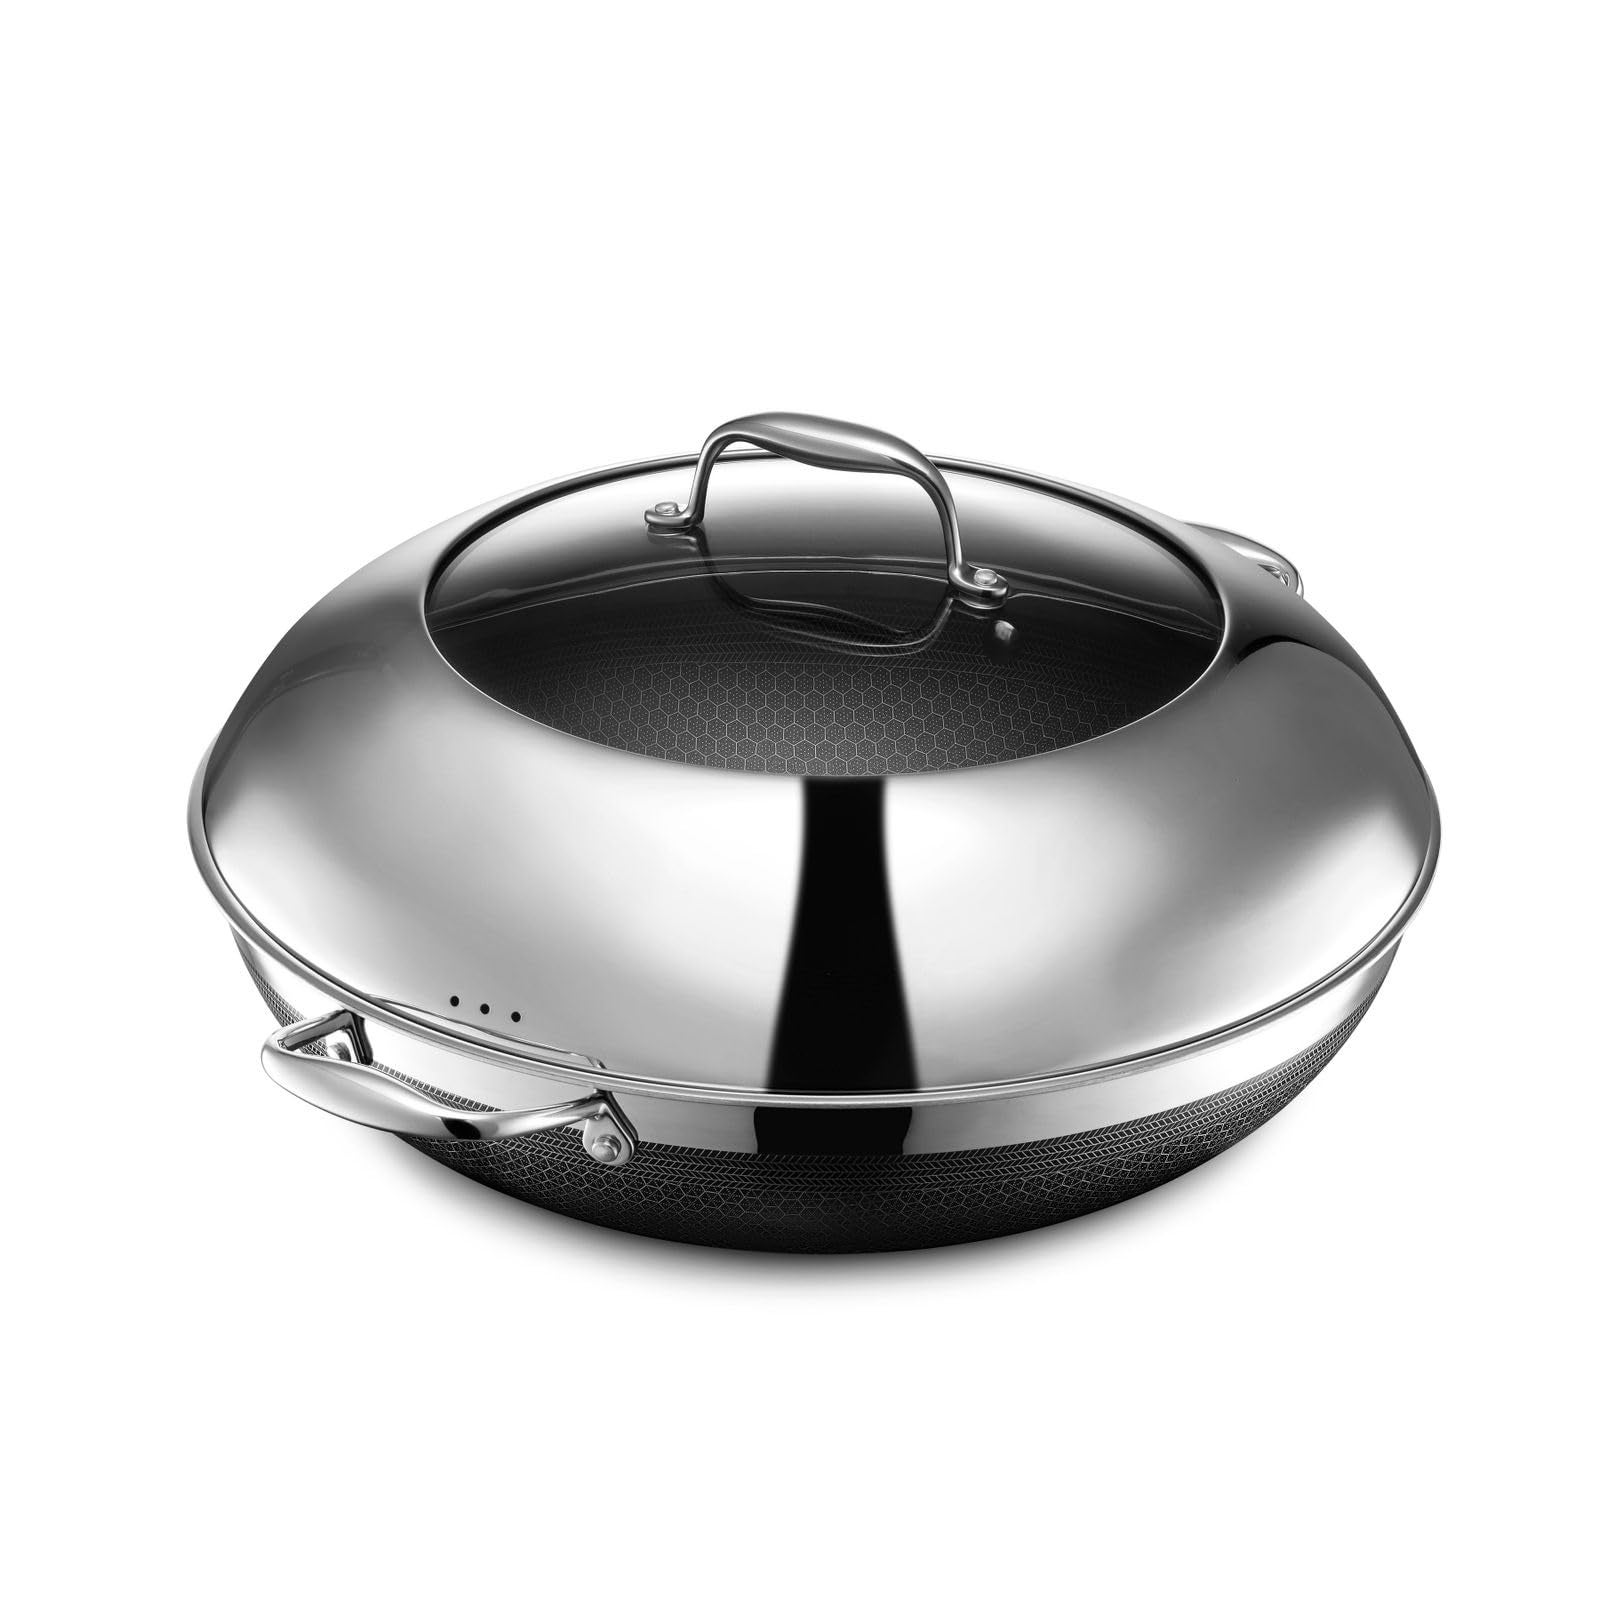 HexClad 12 inch Hybrid Stainless Steel Frying Pan